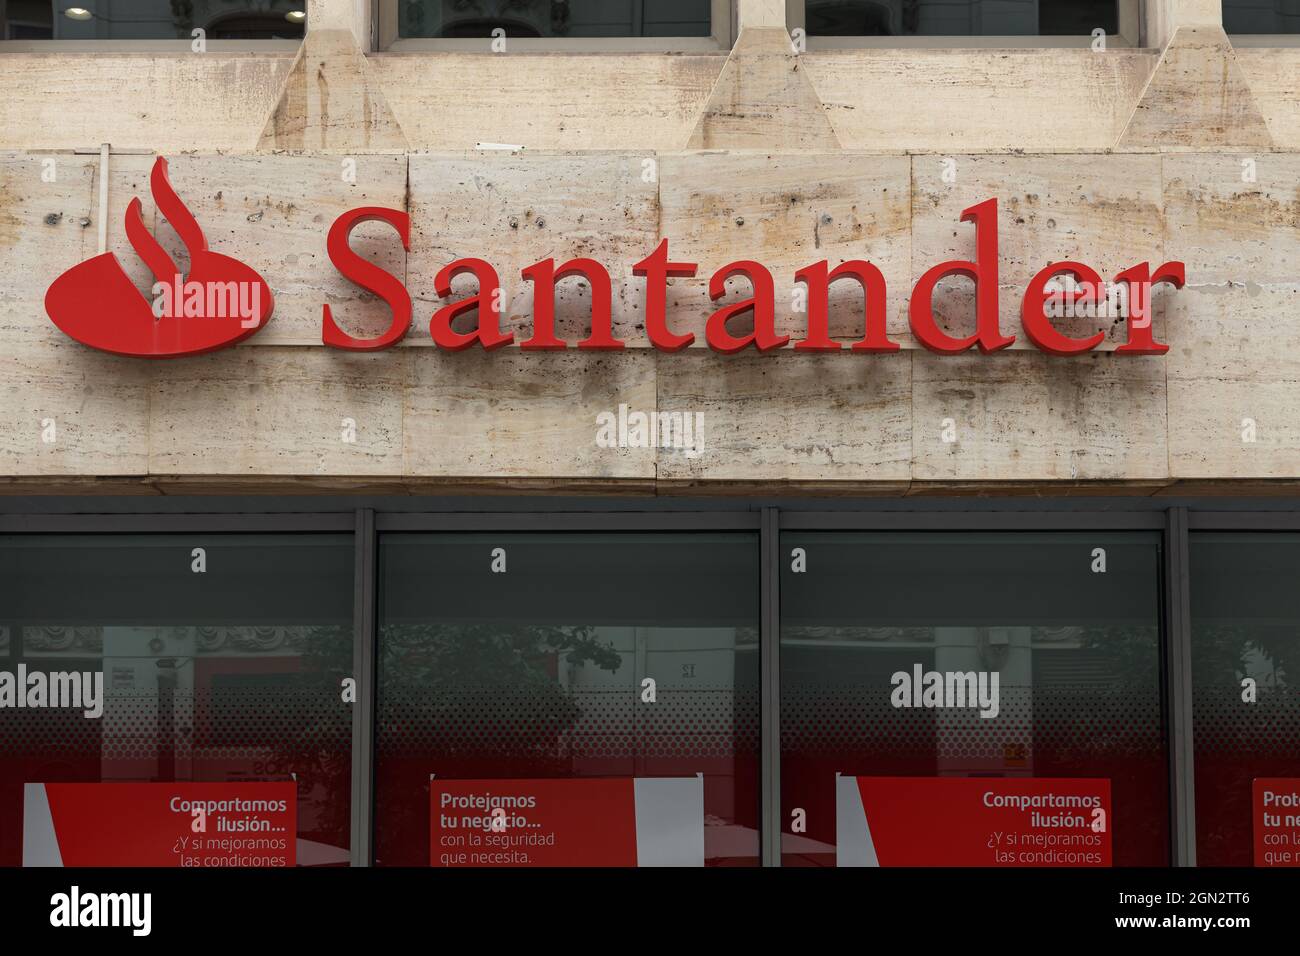 VALENCIA, SPAIN - SEPTEMBER 14, 2021: Banco Santander is a Spanish bank based in Santander. It is one of the most important financial institutions in Stock Photo